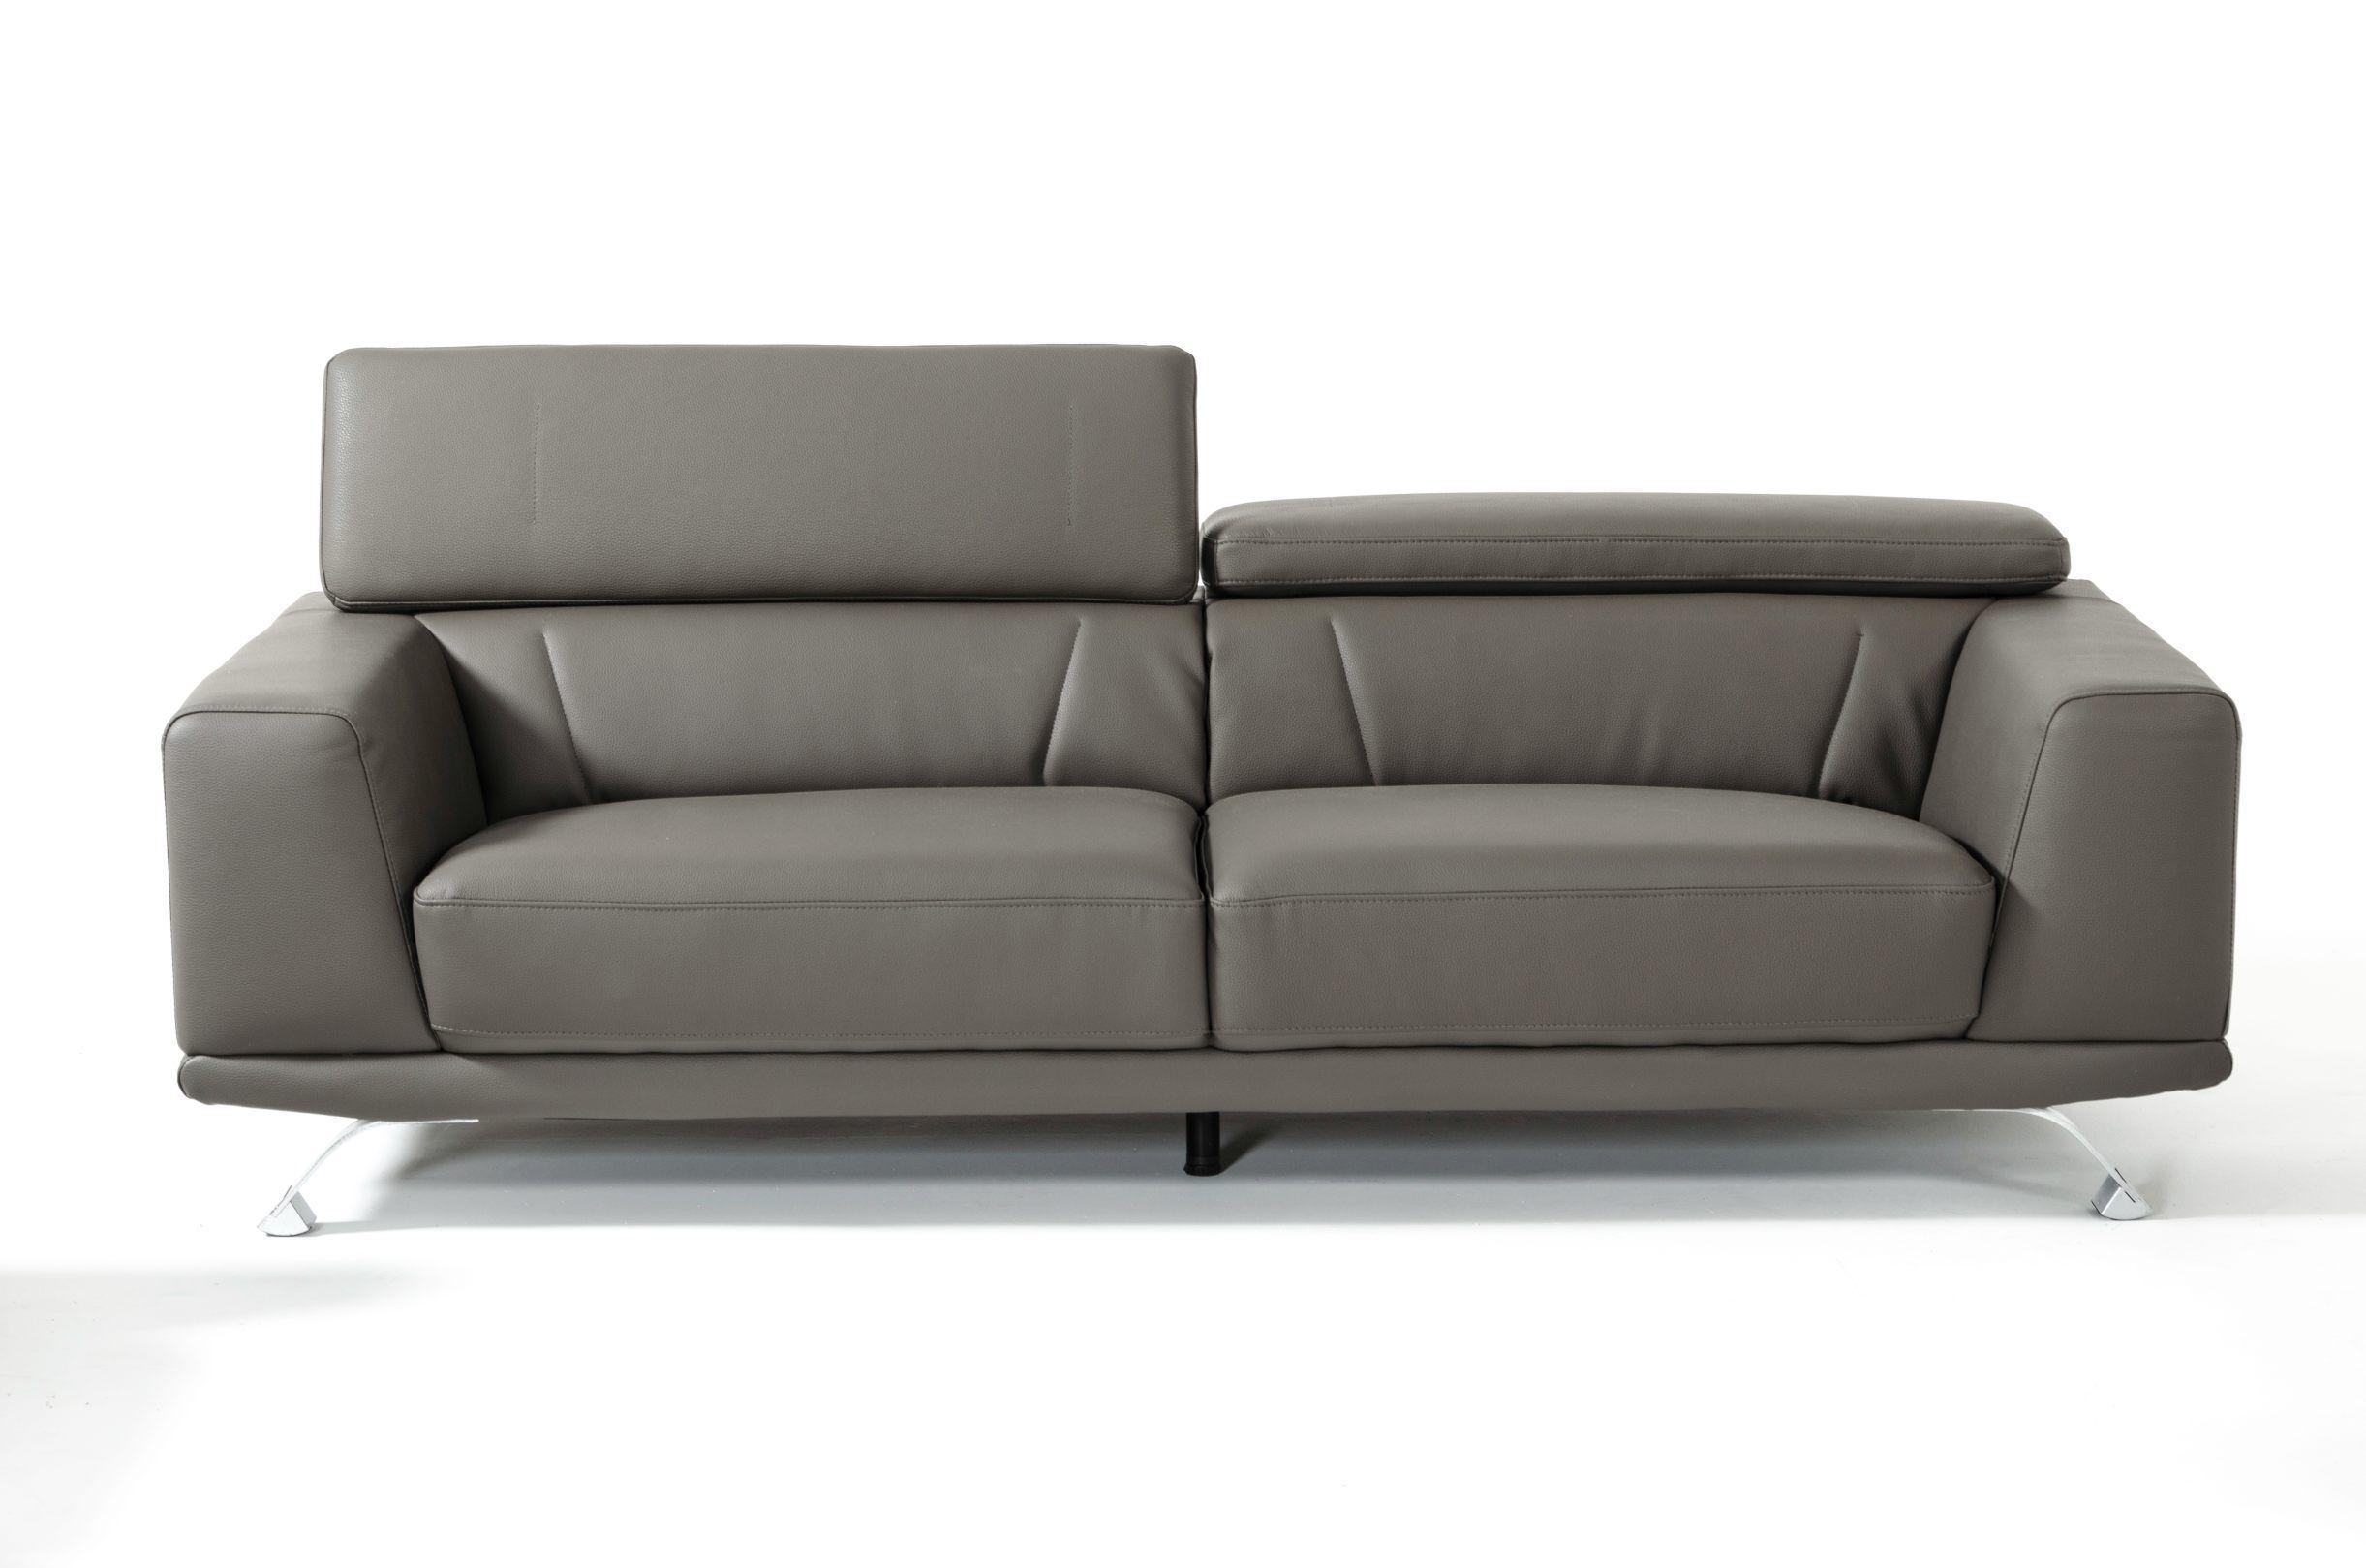 Contemporary, Modern Sofa VGKN8334-GRY-S VGKN8334-GRY-S in Dark Grey Eco-Leather